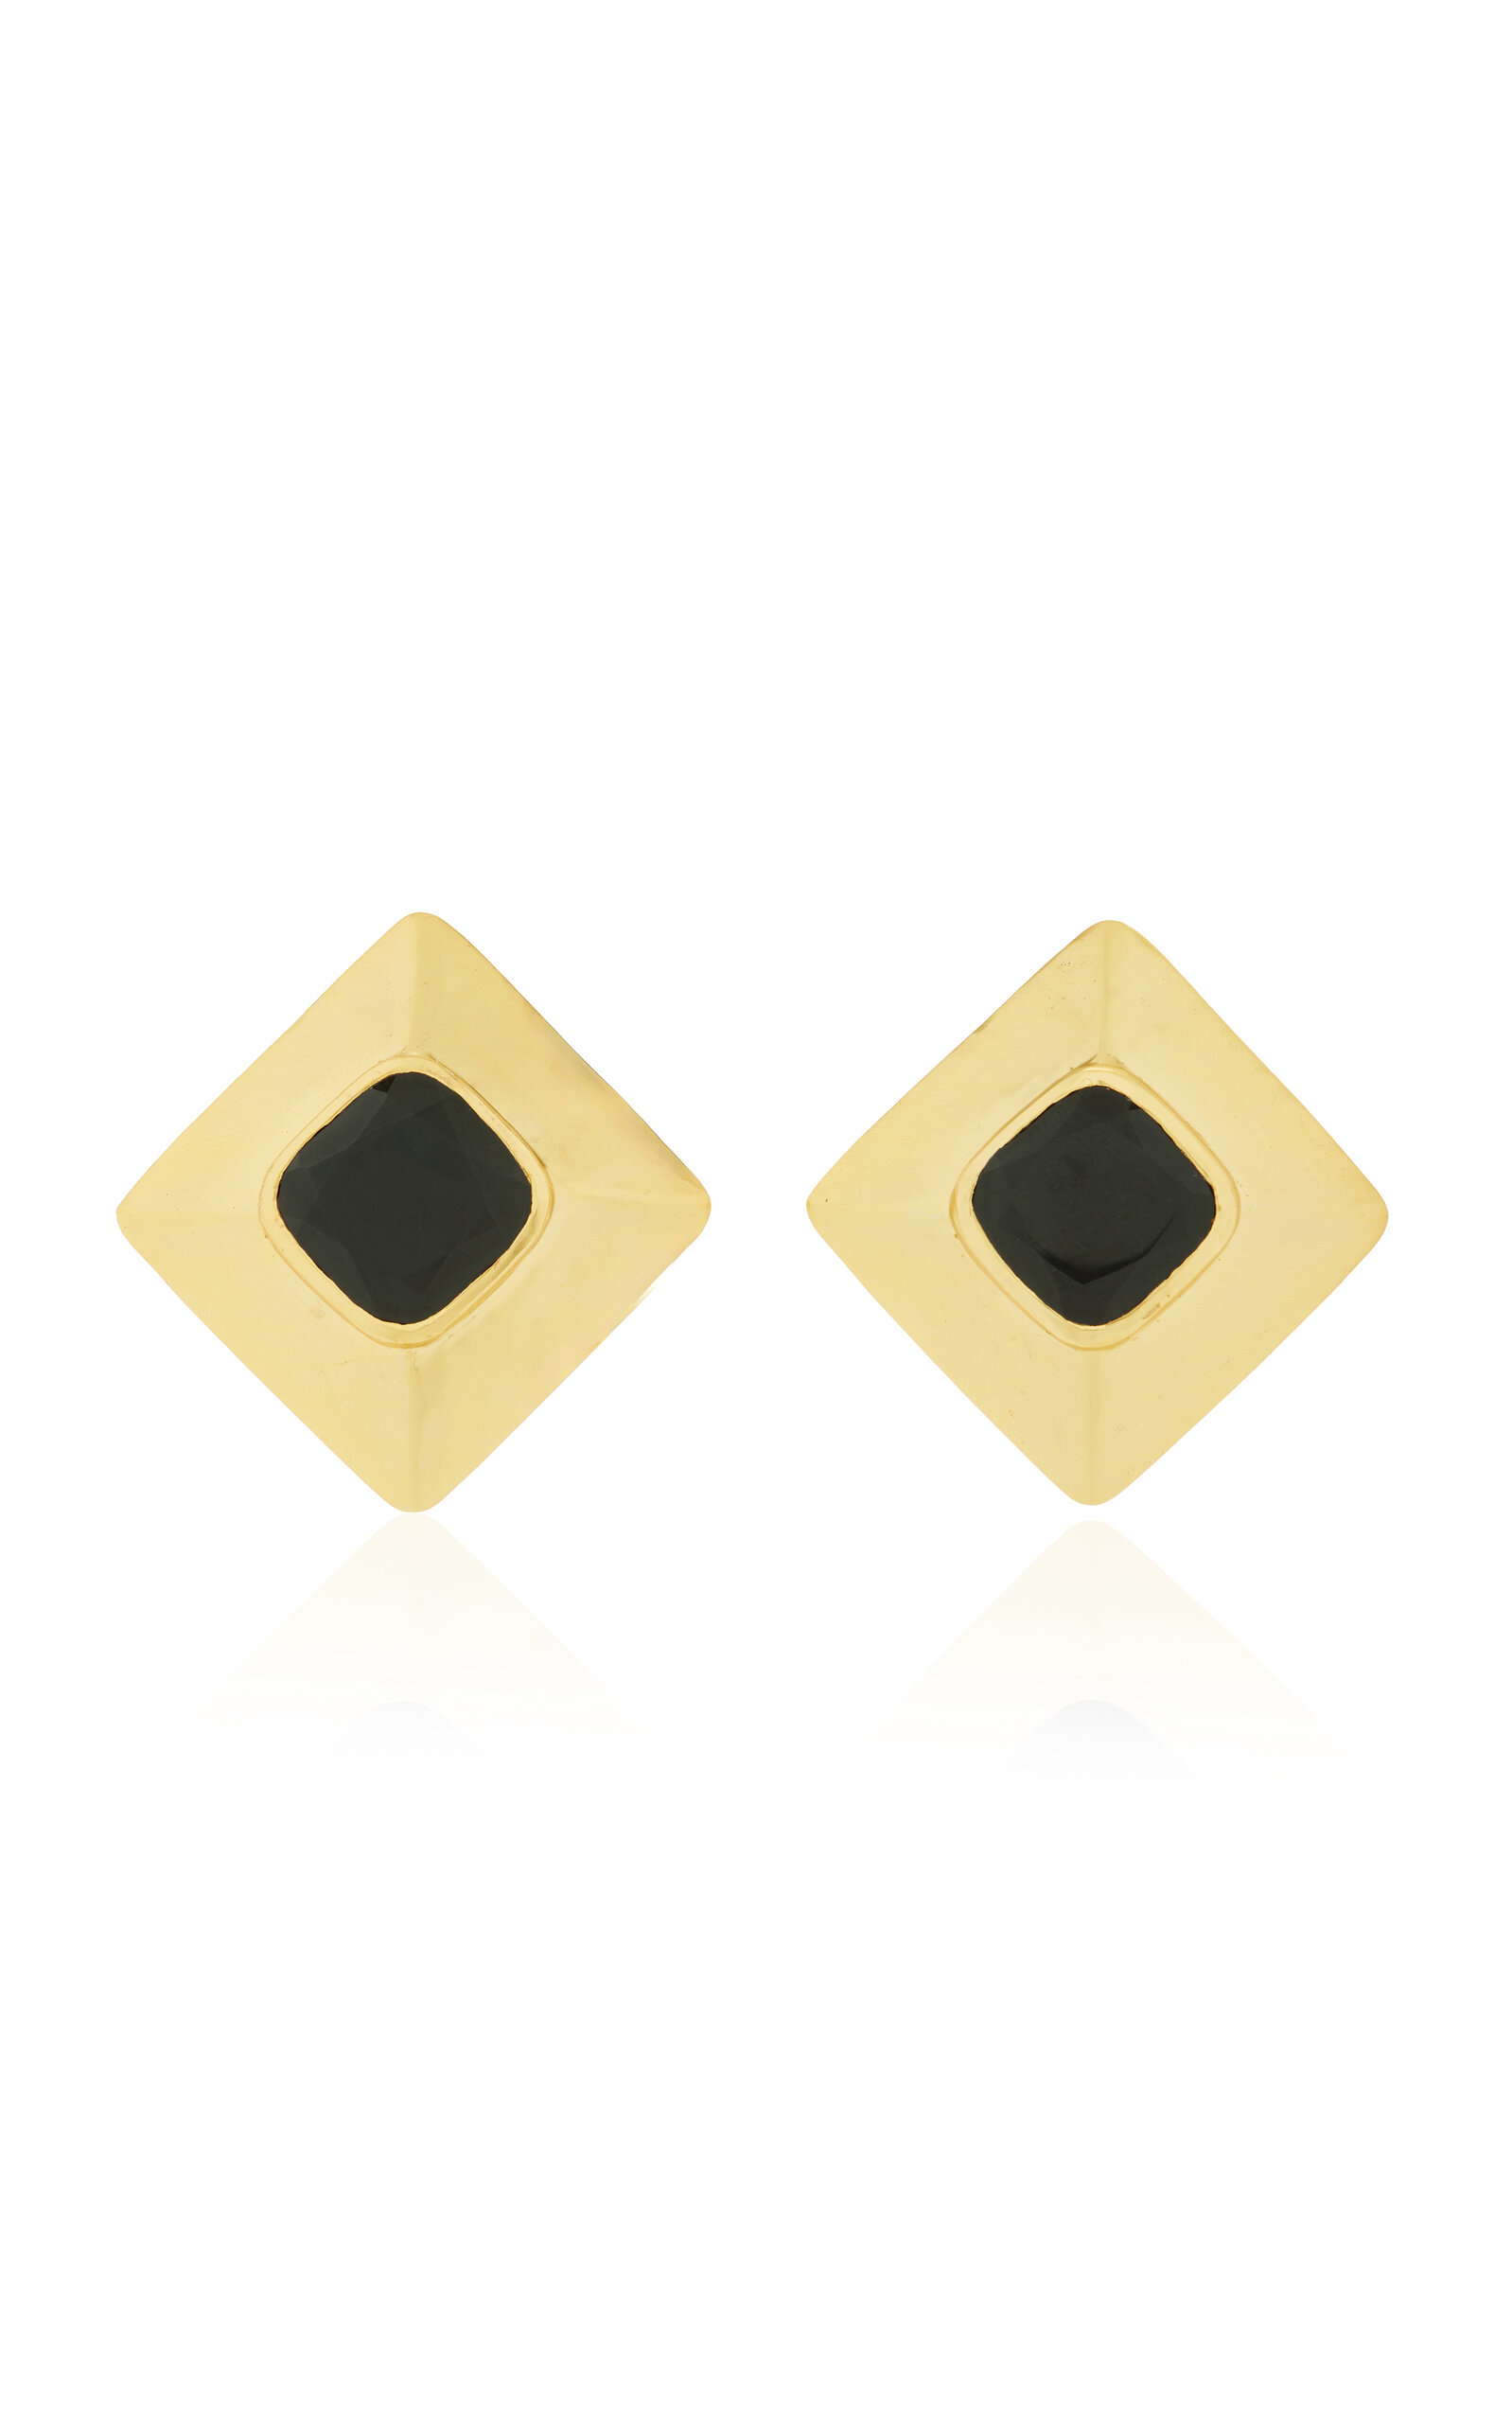 Valére Jas 24k Gold-plated; Onyx Earrings